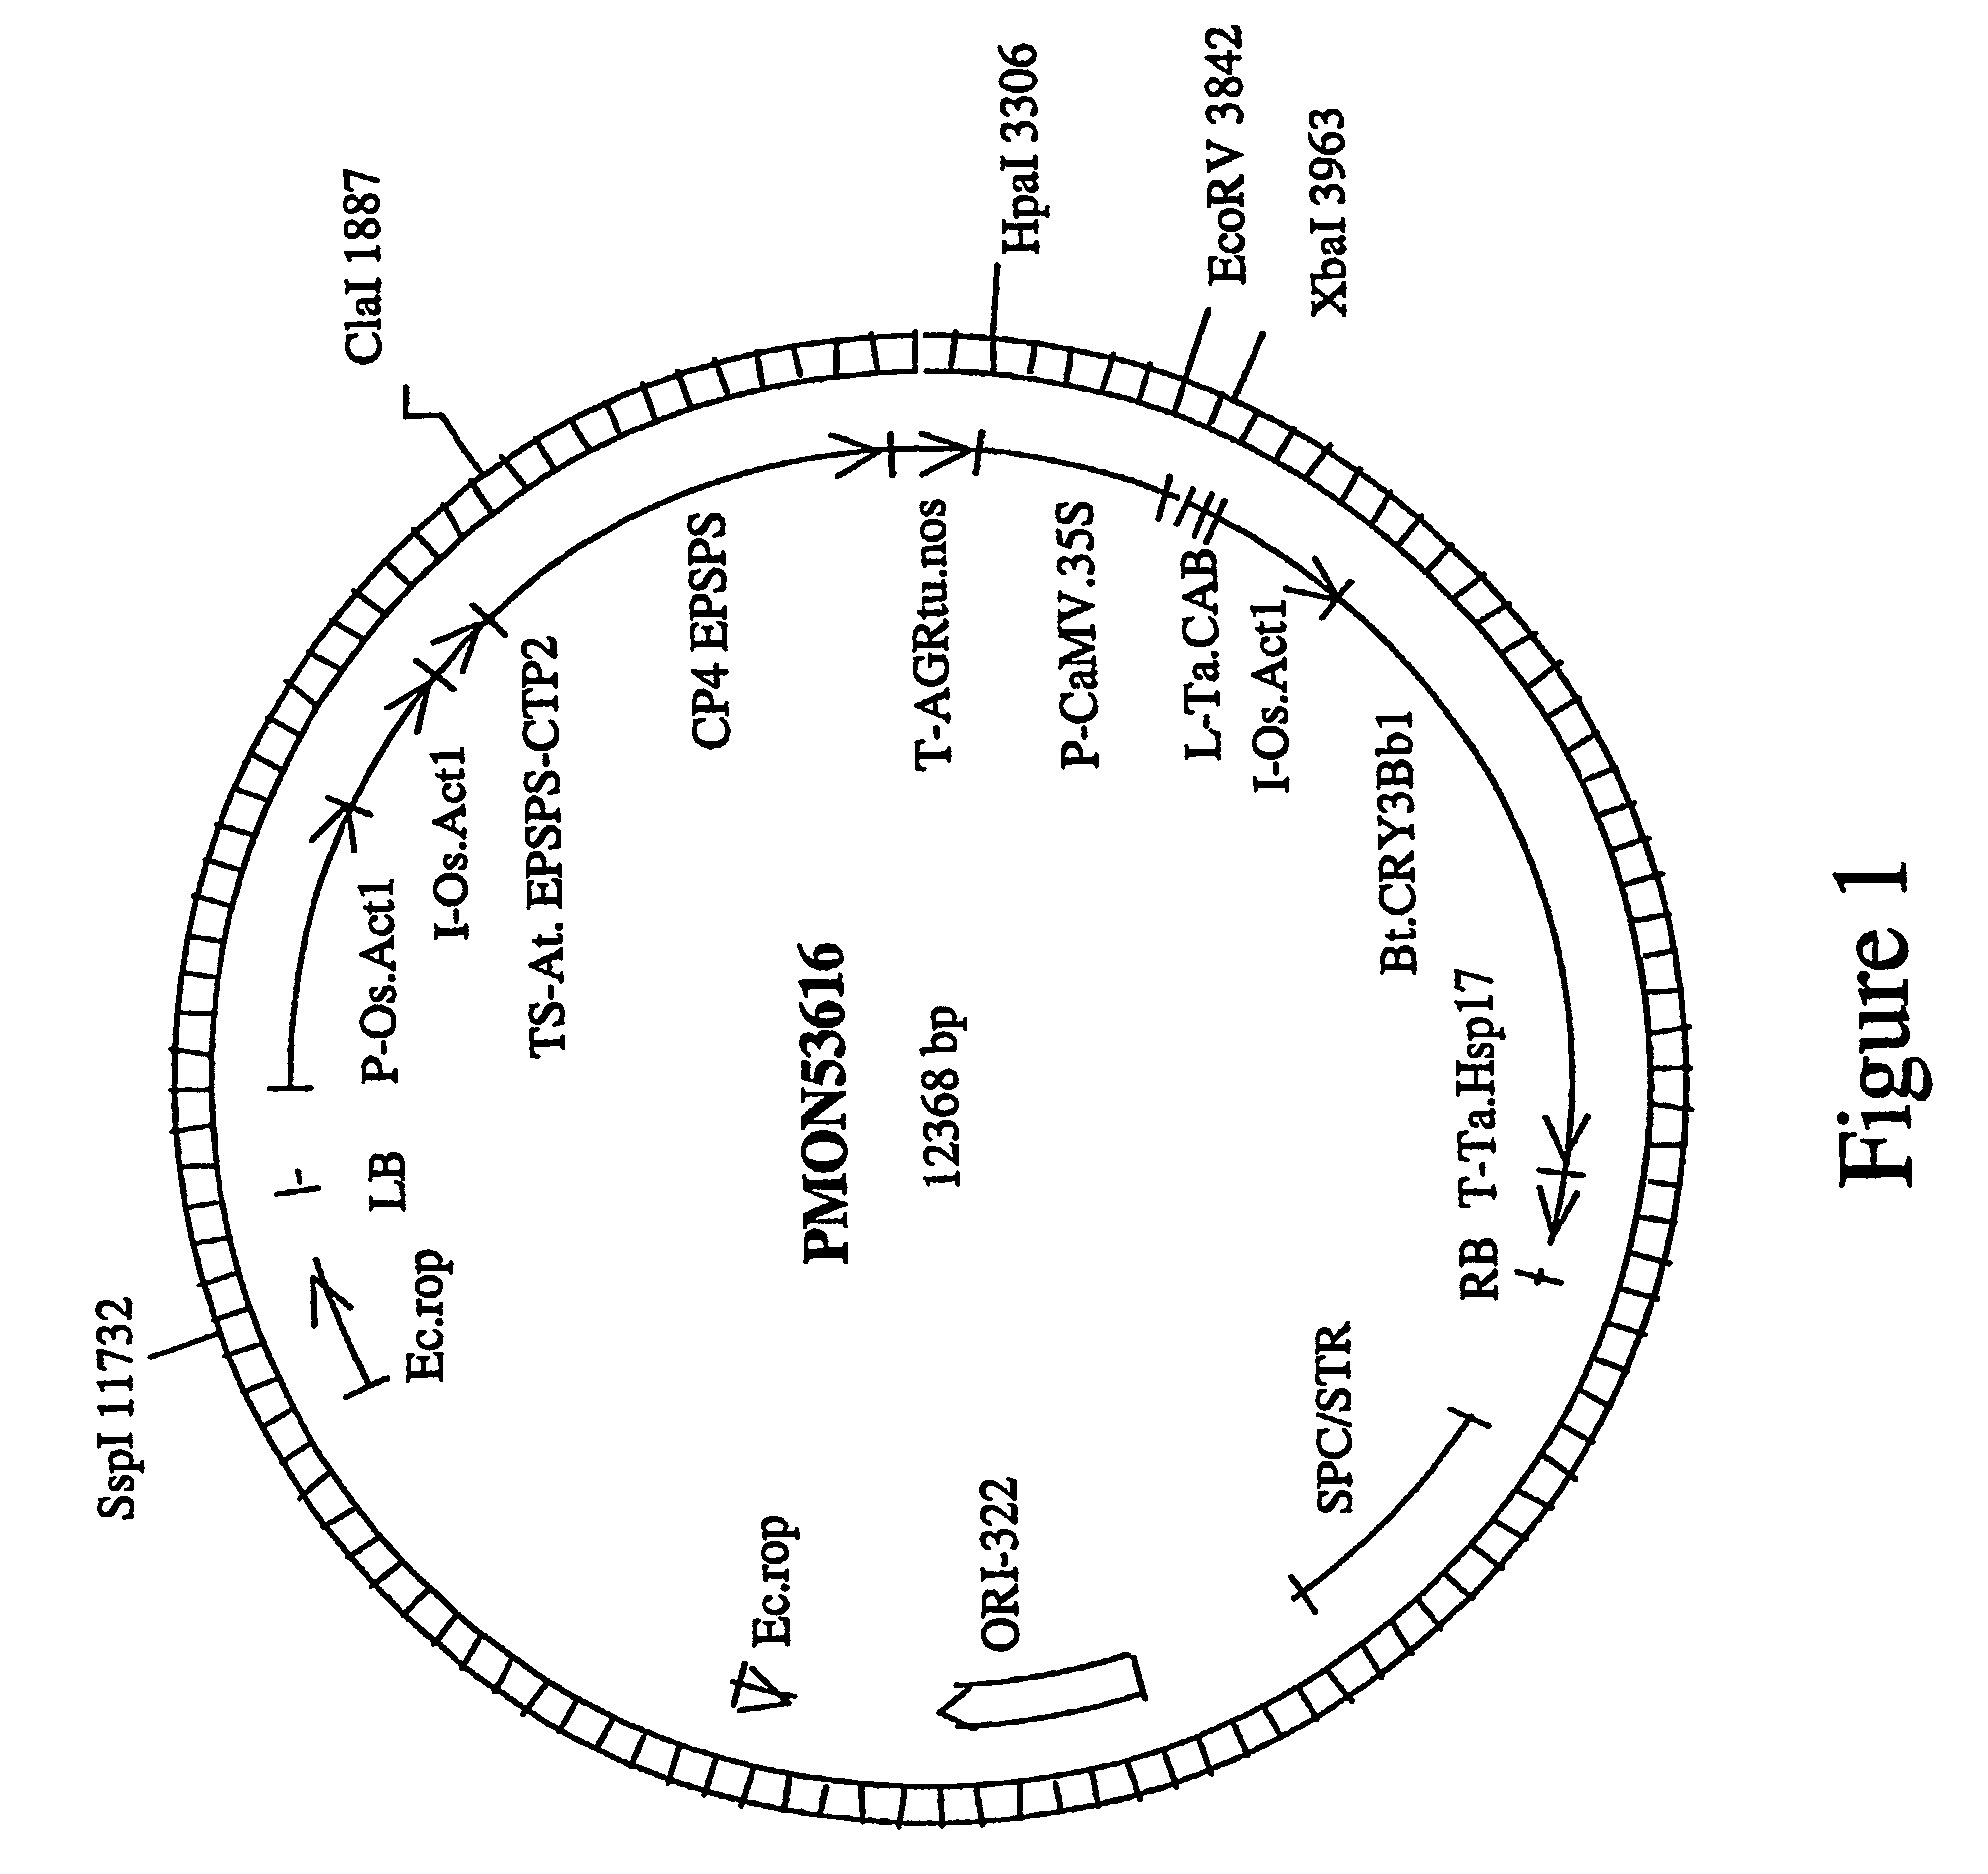 Corn plant Mon88017 and compositions and methods for detection thereof